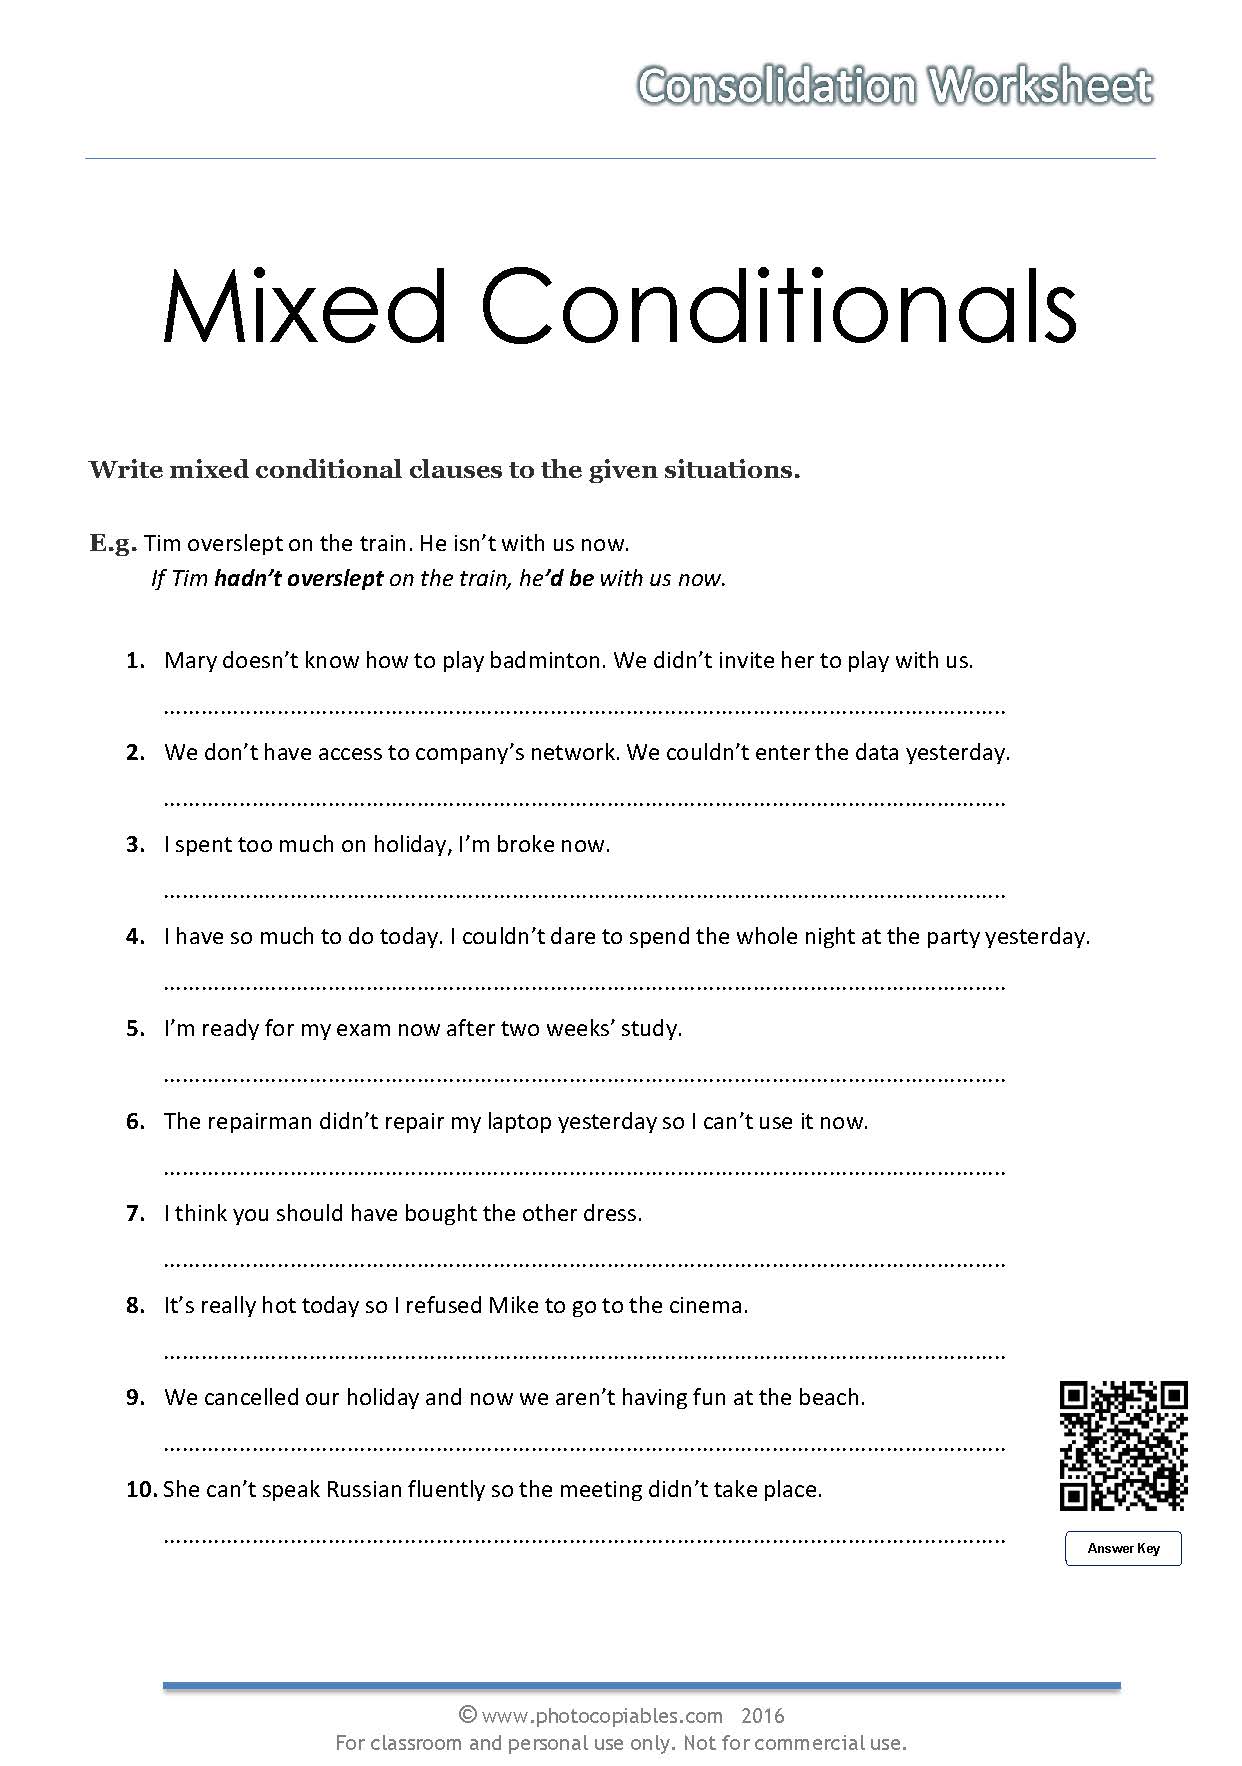 conditional-statements-worksheet-with-answers